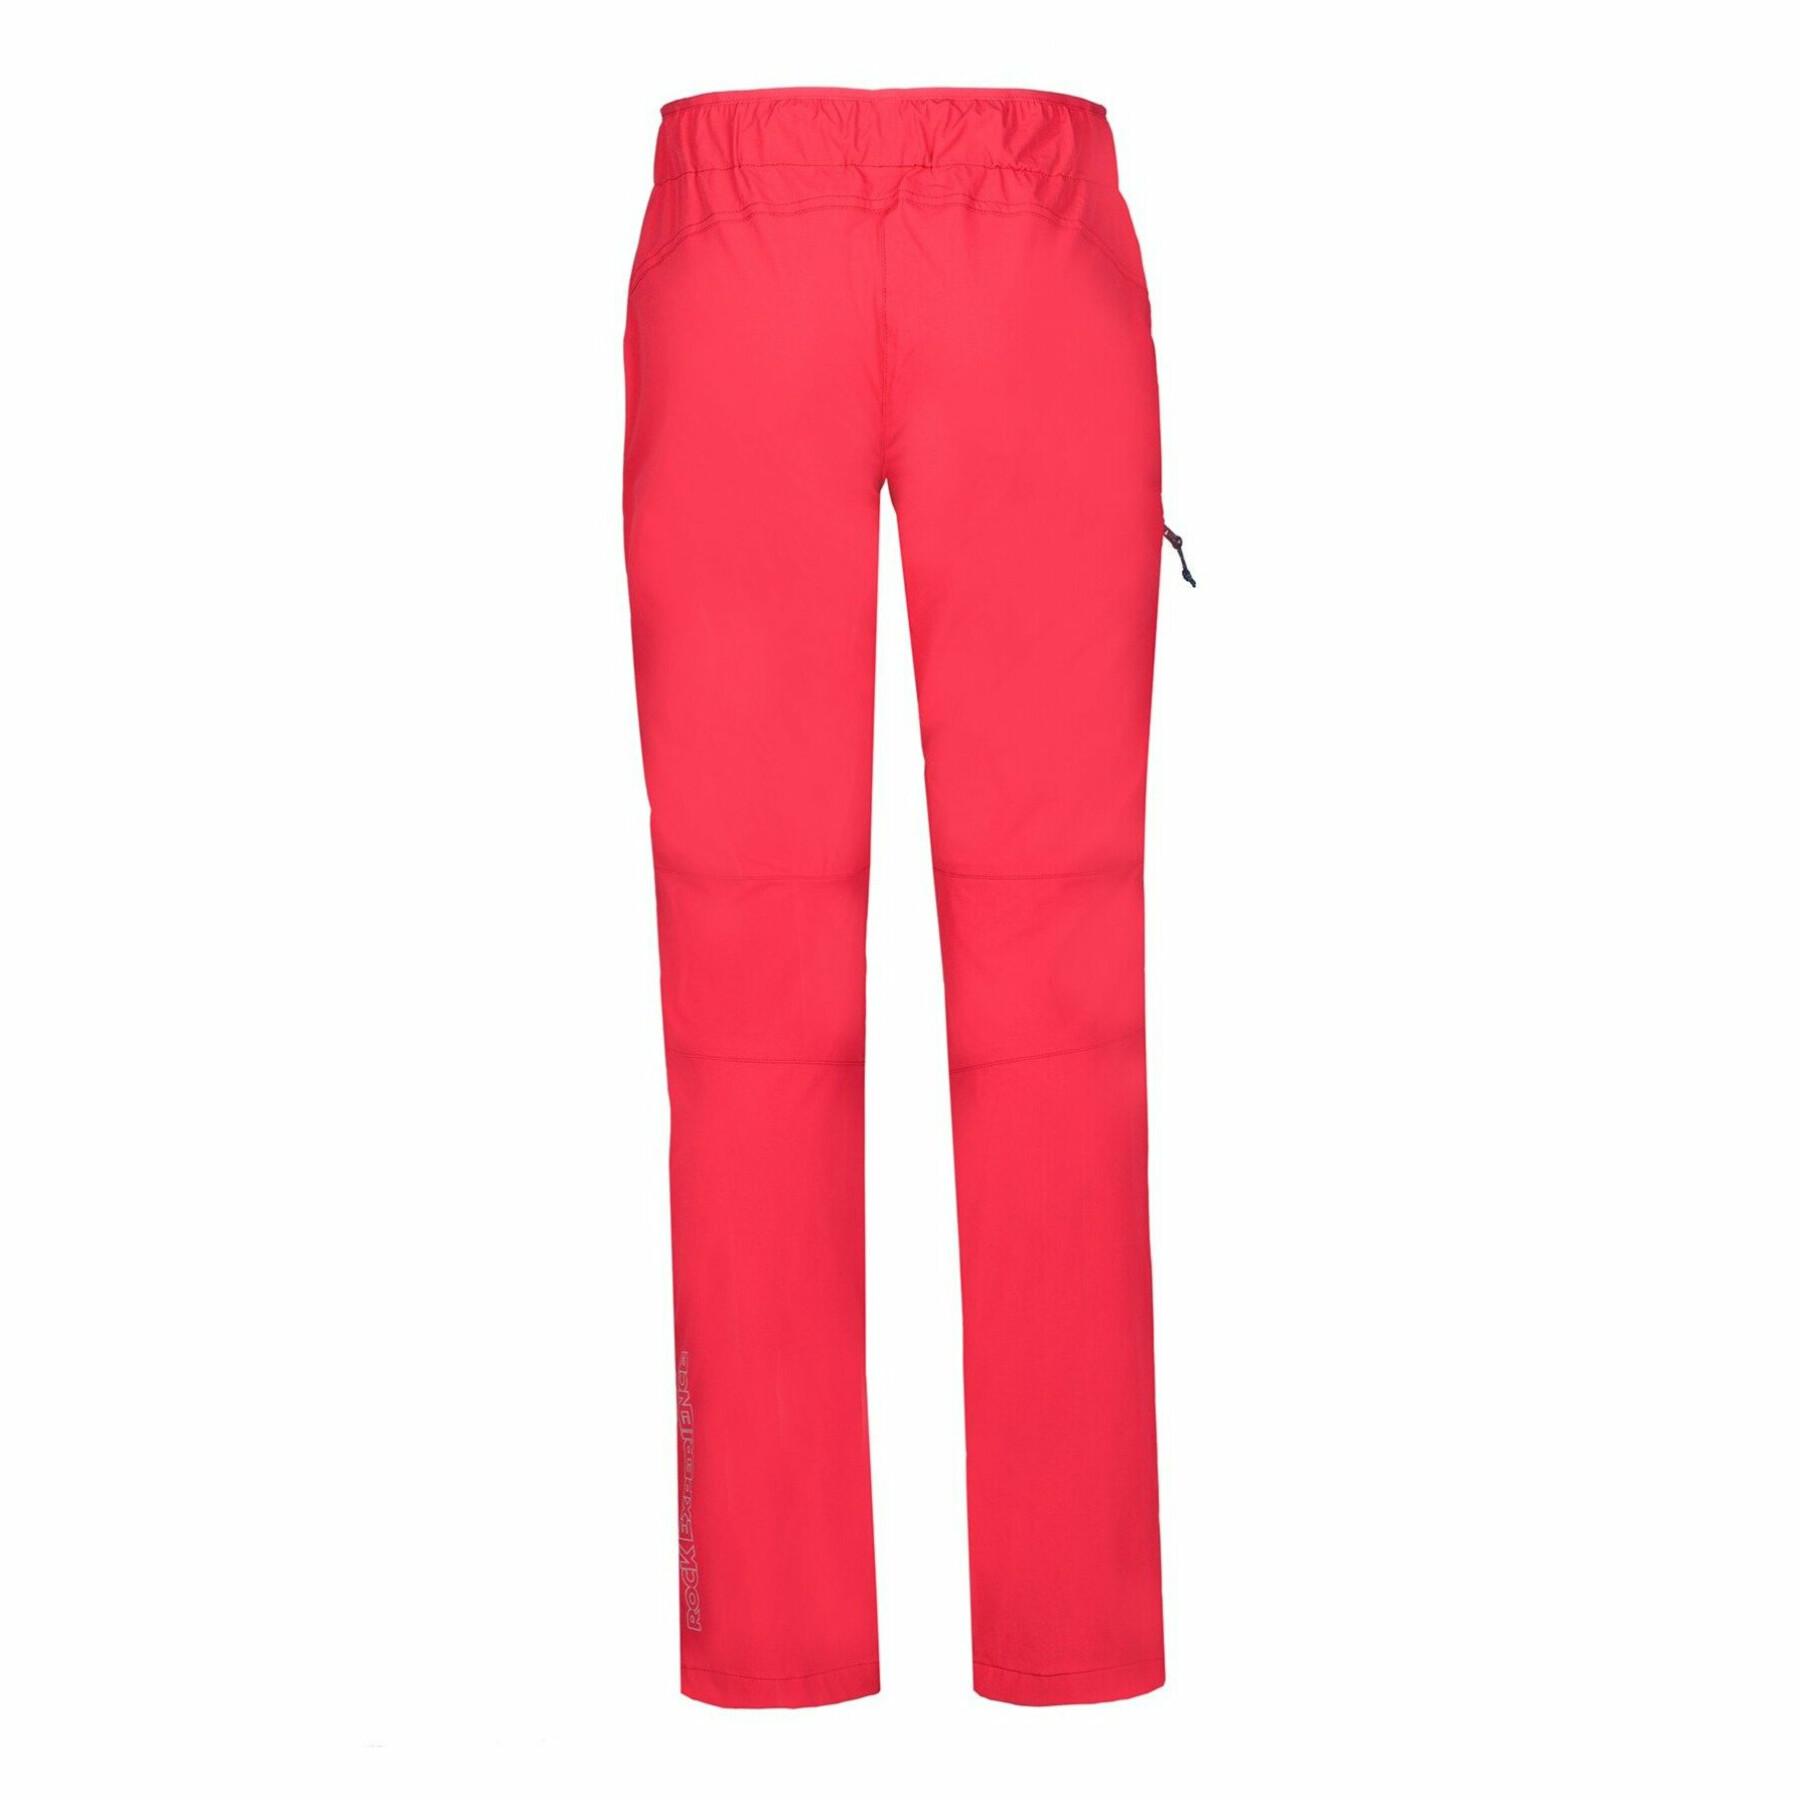 Women's trousers Rock Experience Space Flake